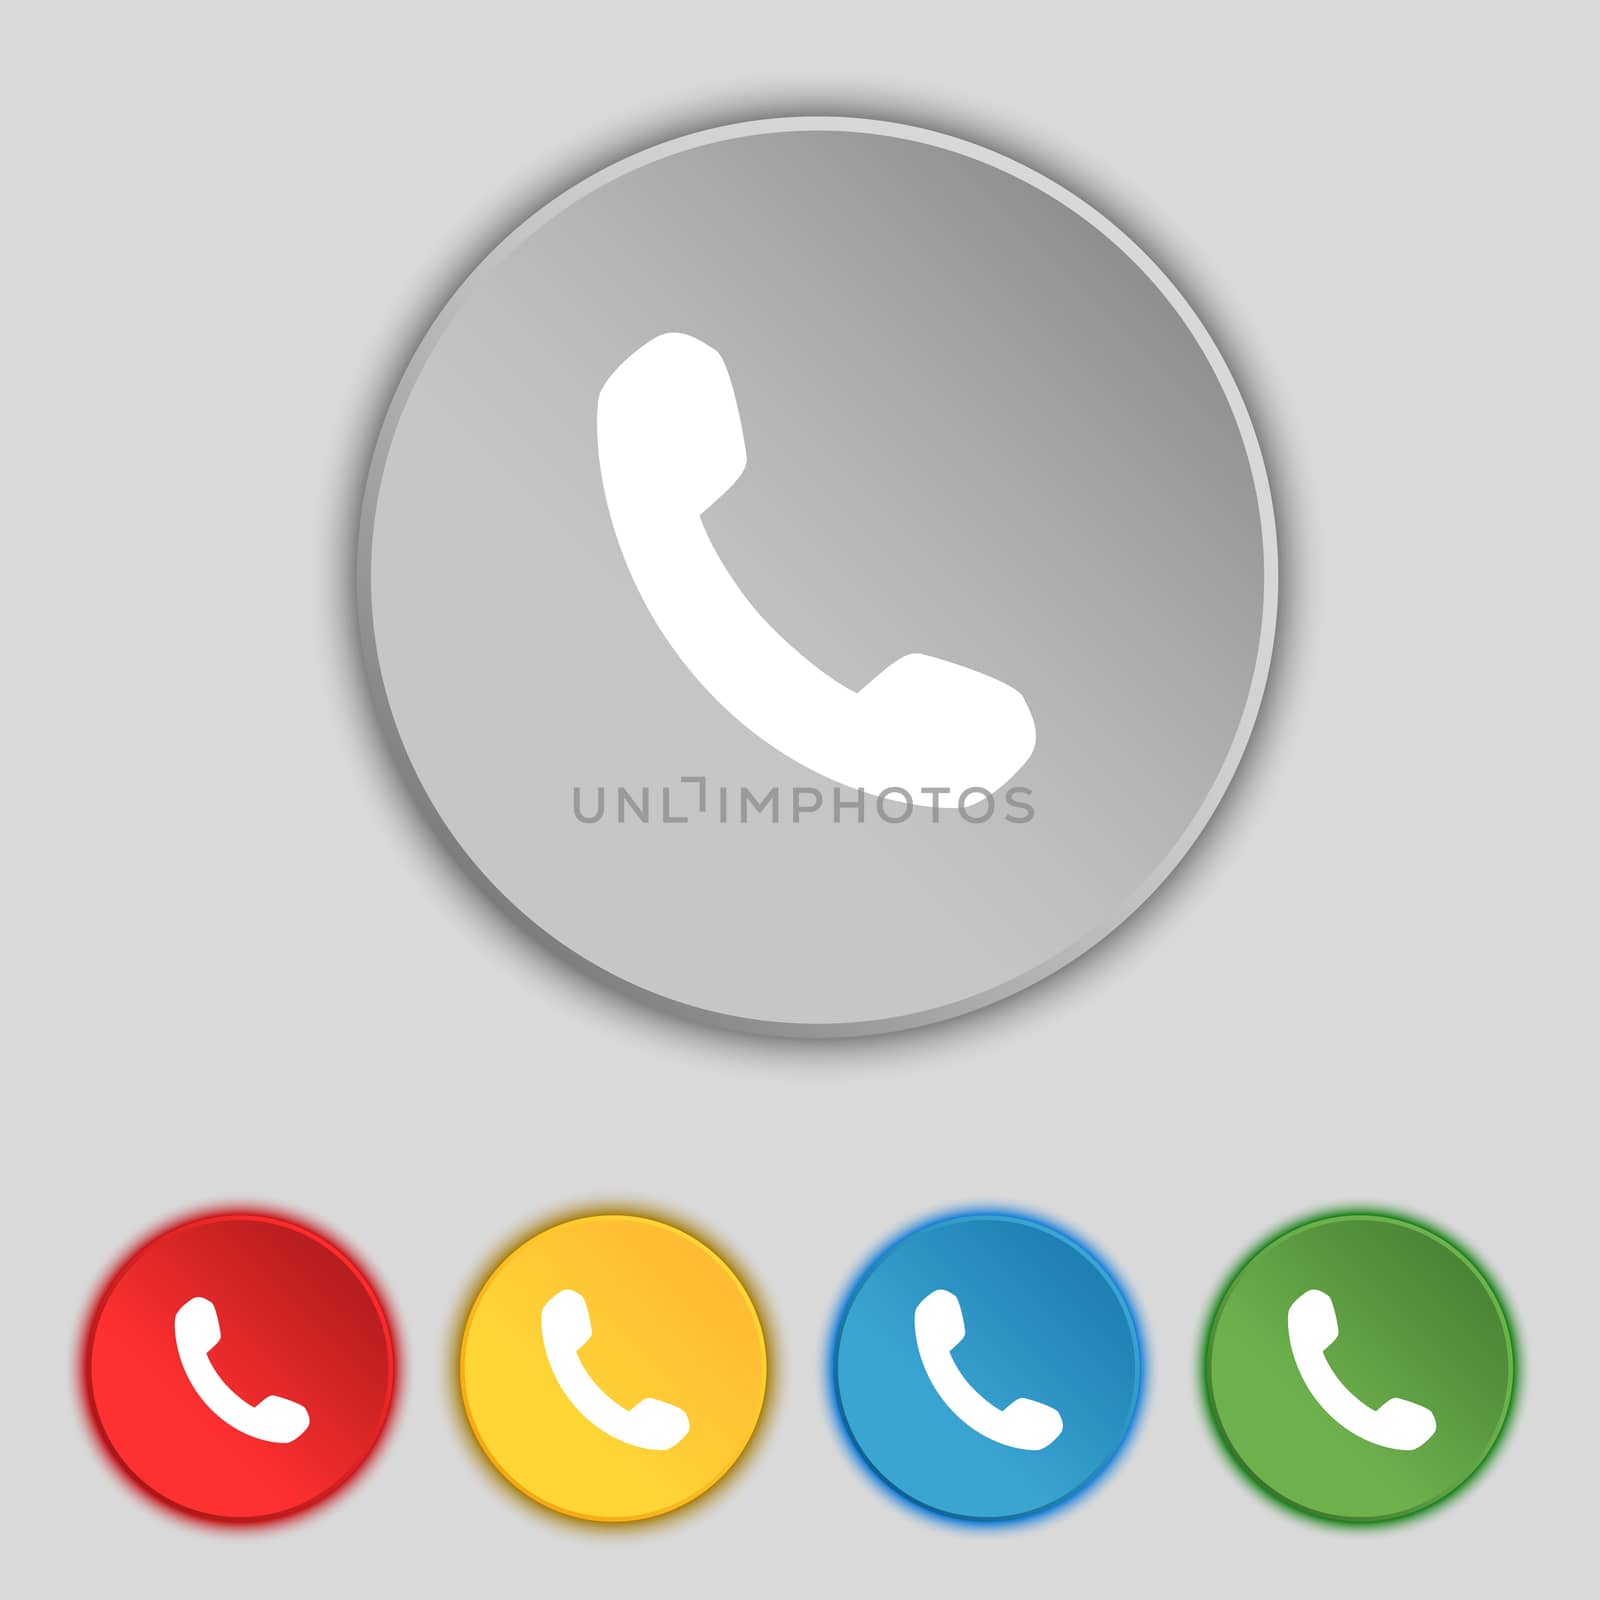 Phone, Support, Call center icon sign. Symbol on five flat buttons. illustration